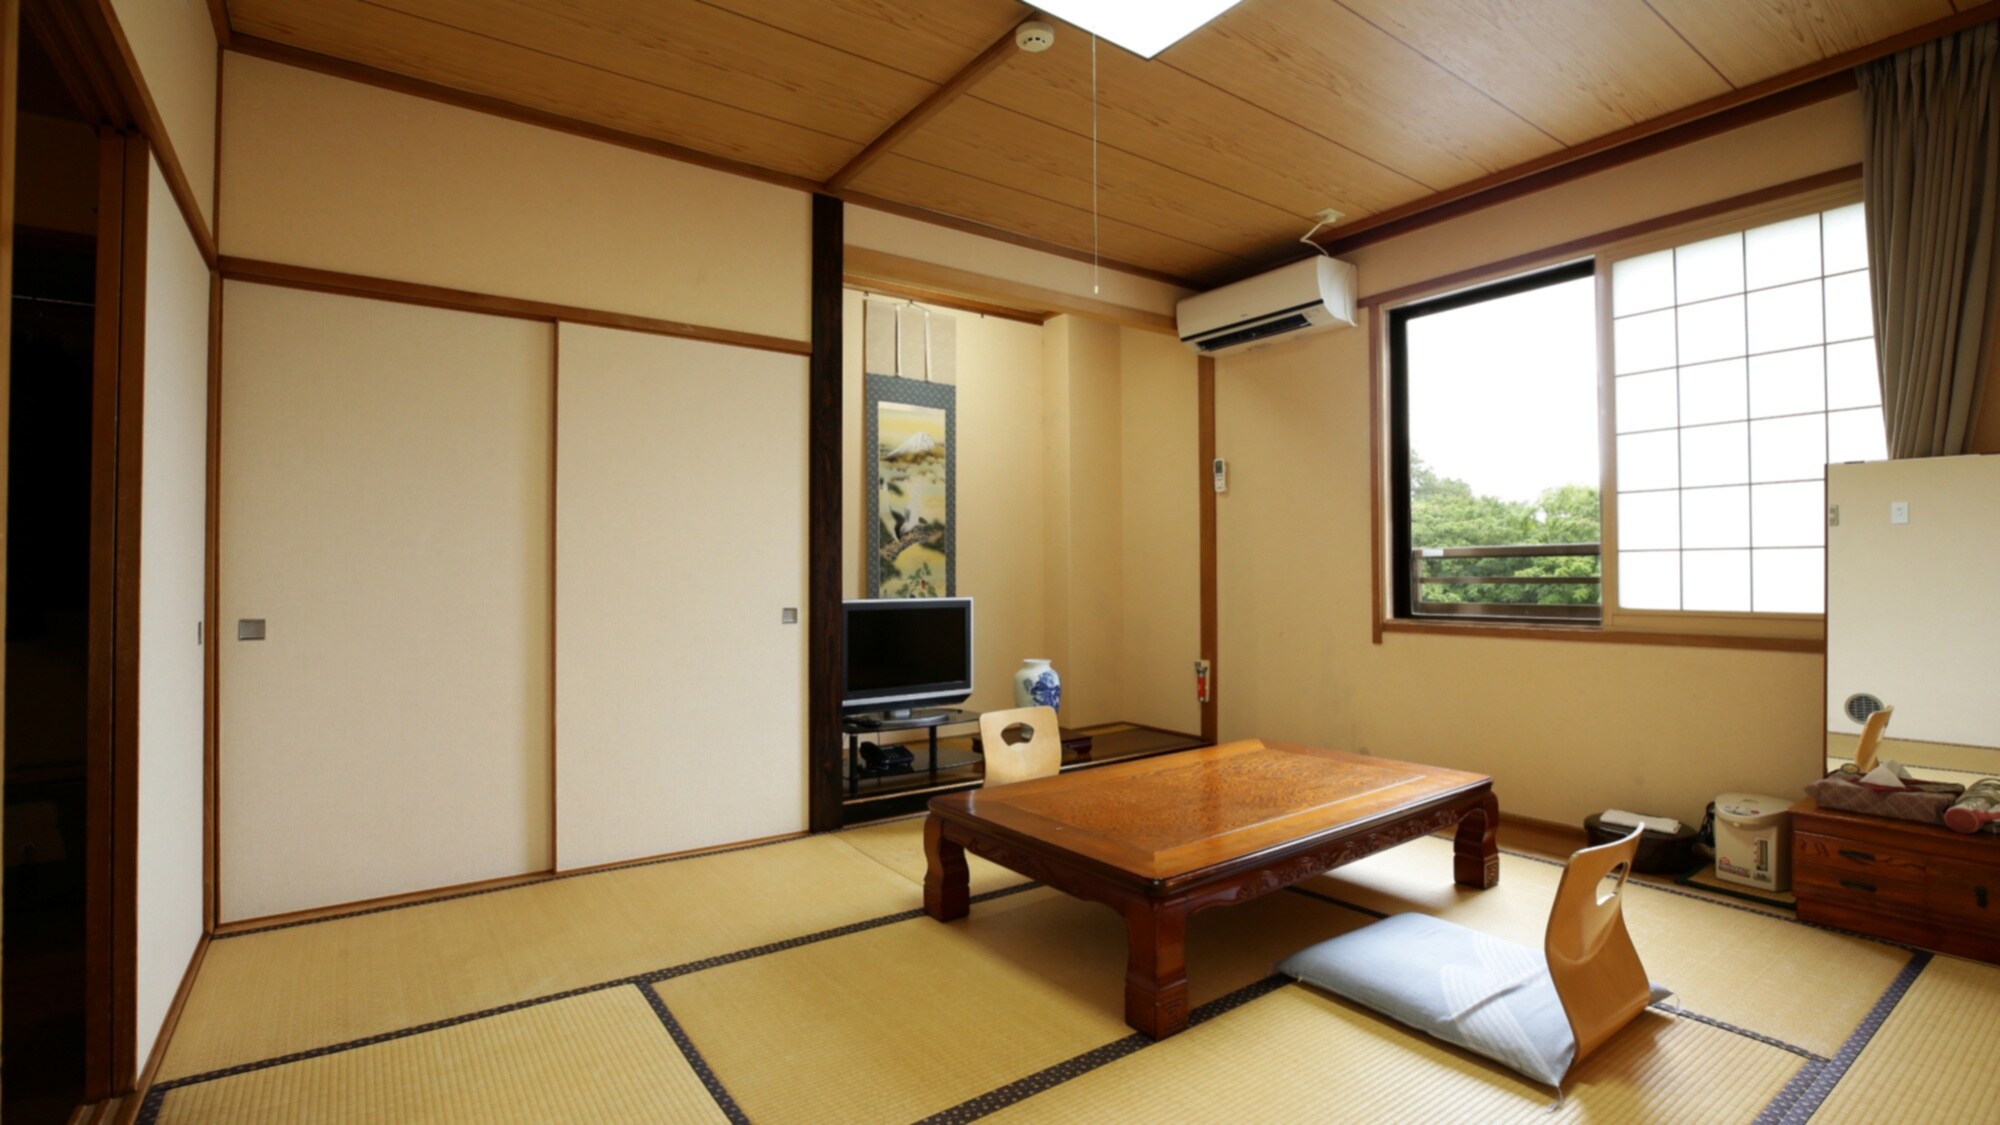 Main building Japanese-style room 8 tatami mats: A tatami room where you can relax and relax.